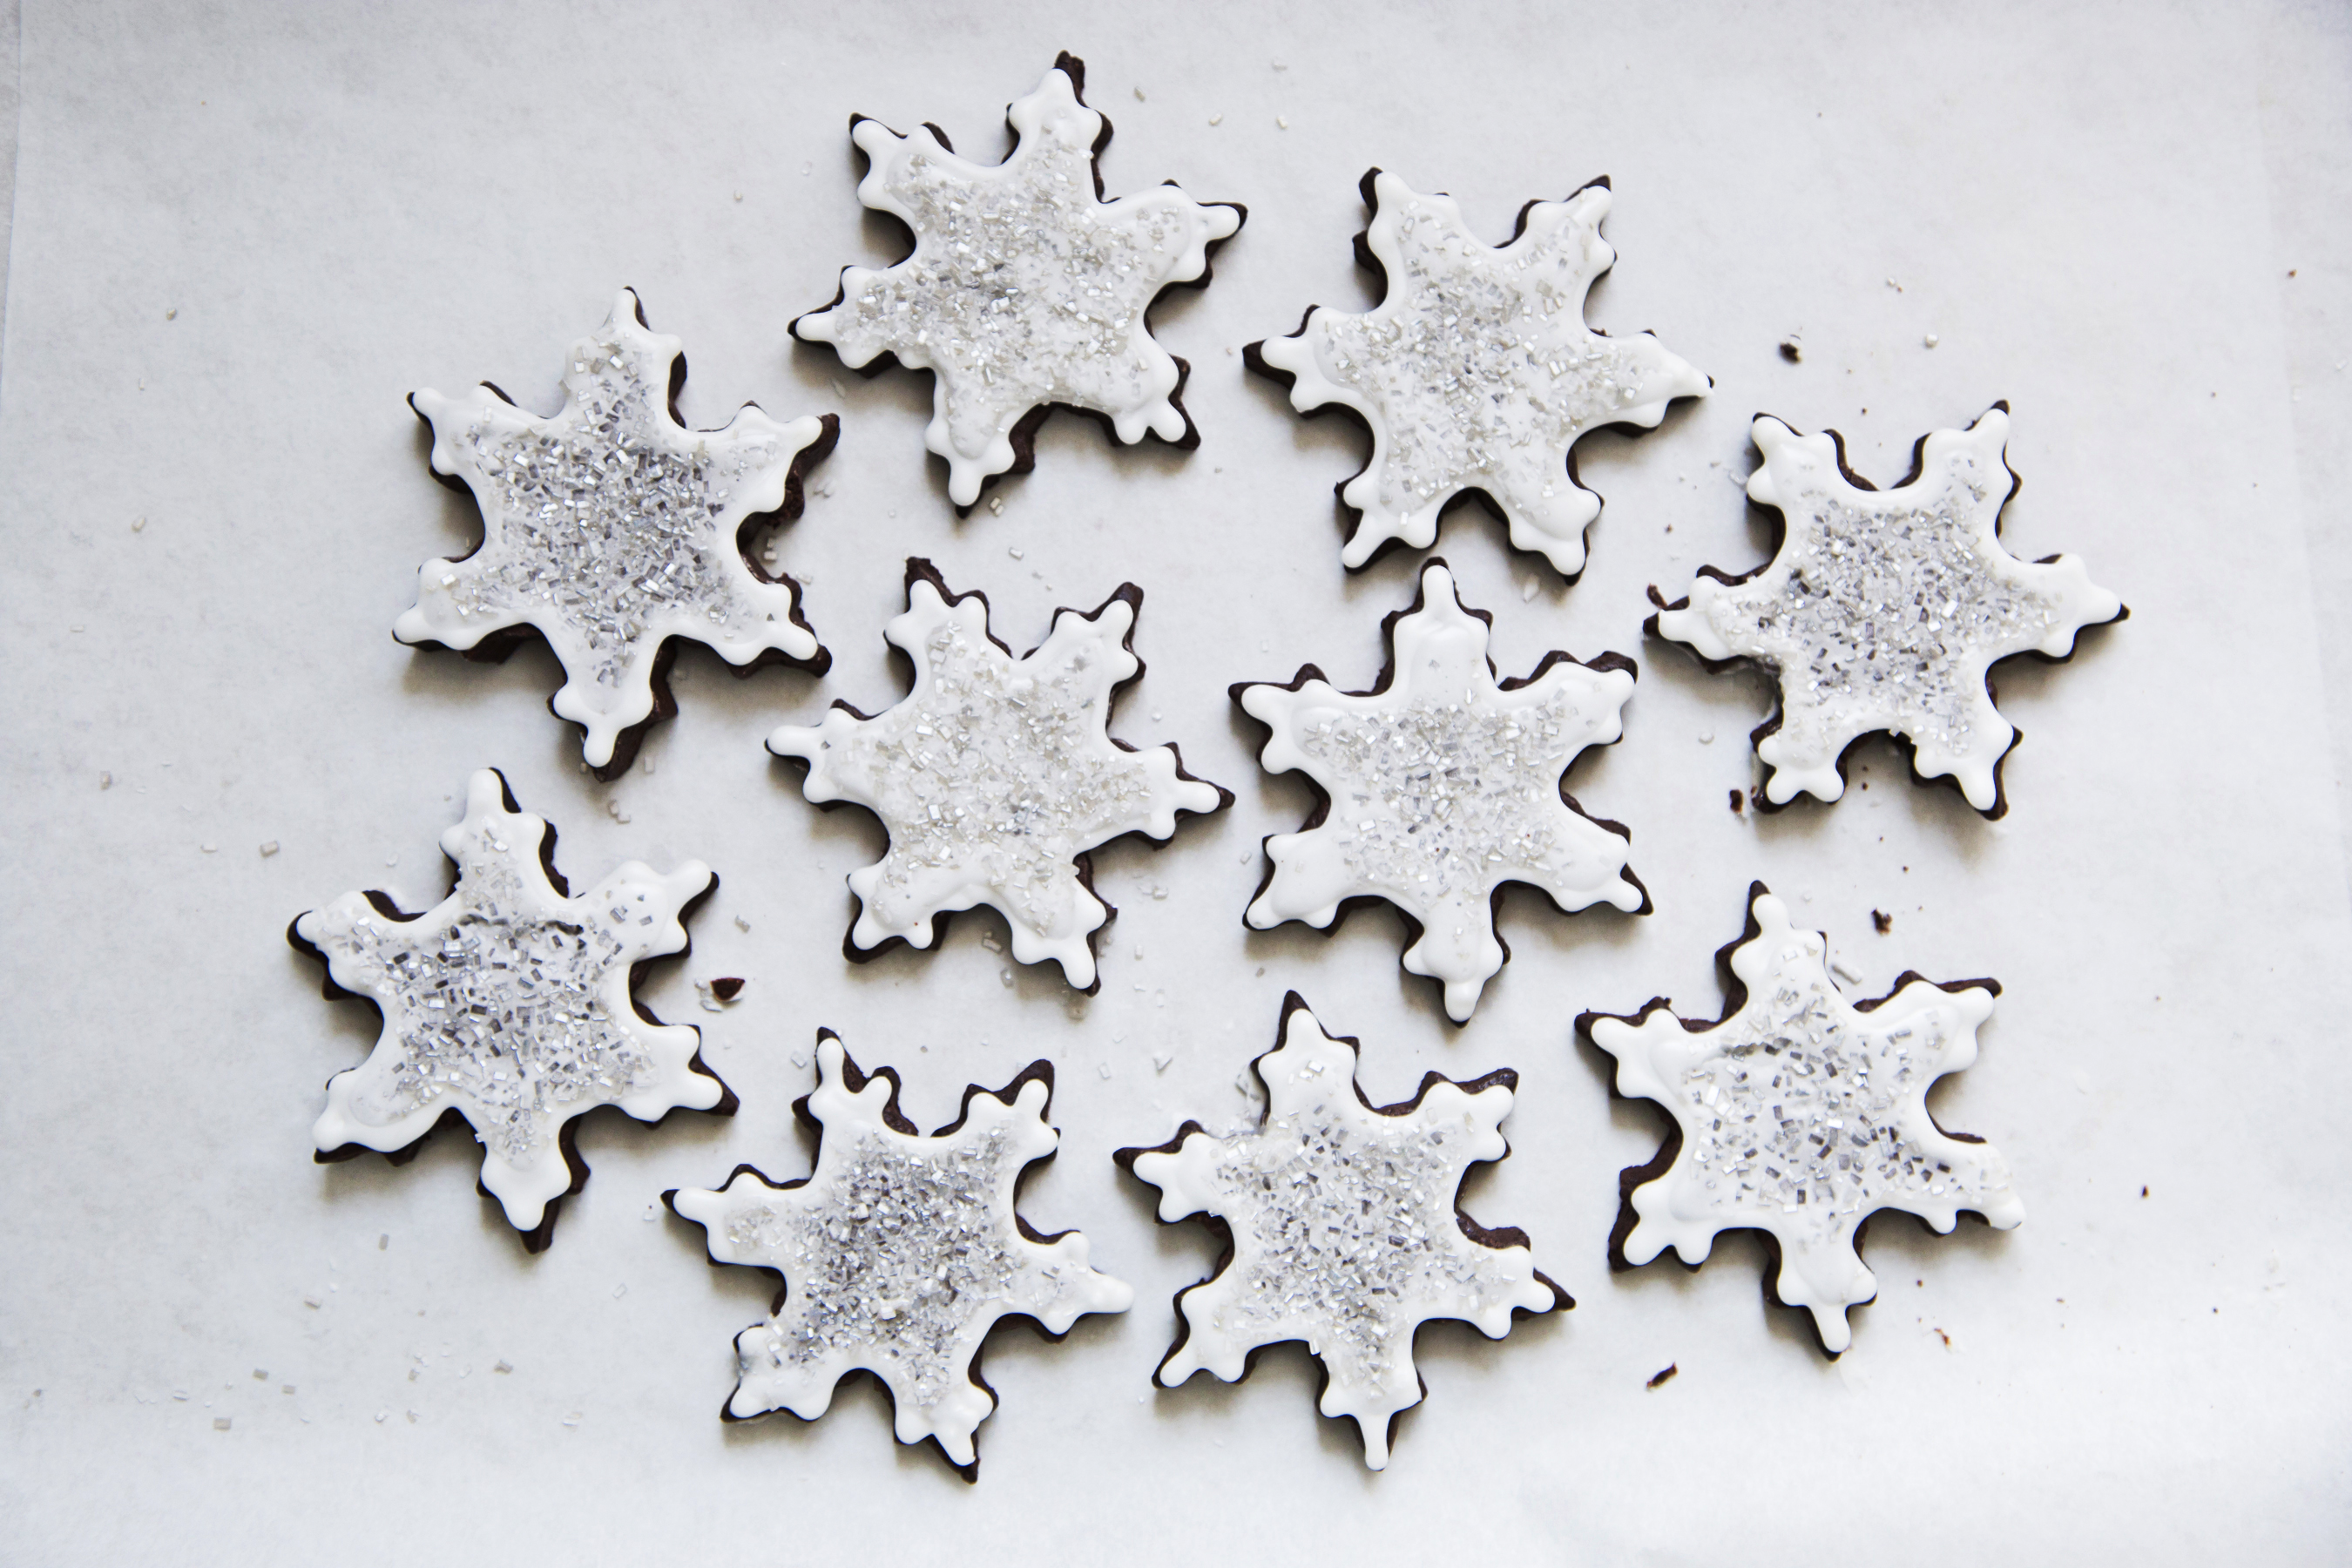 Chocolate snowflake cookies are available at RareSweets in CityCenterDC today. (Photo: RareSweets)